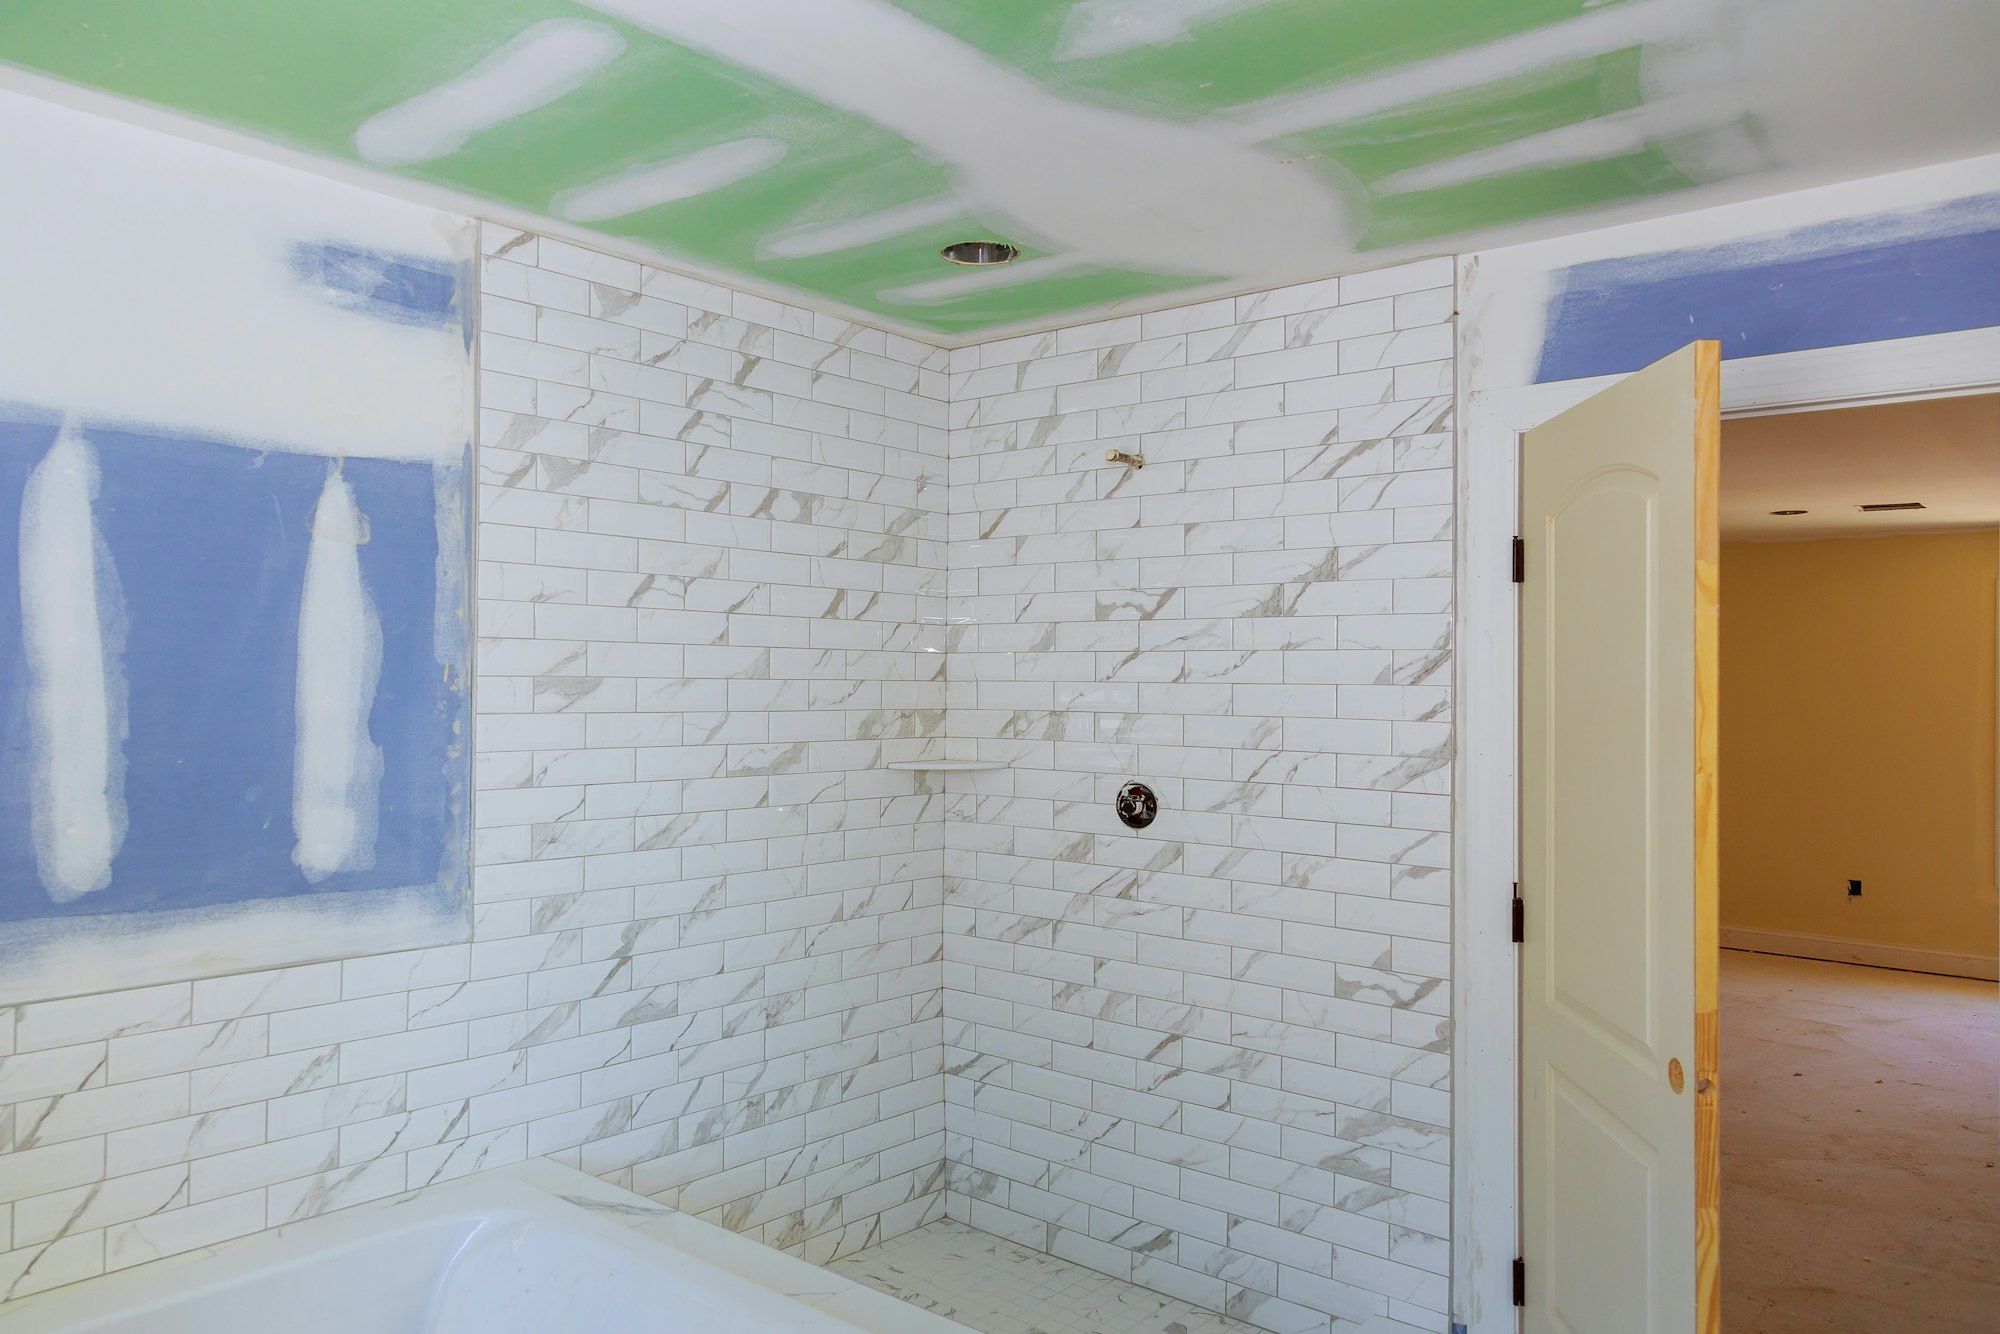 drywall tape bathroom interior with drywall completely installed